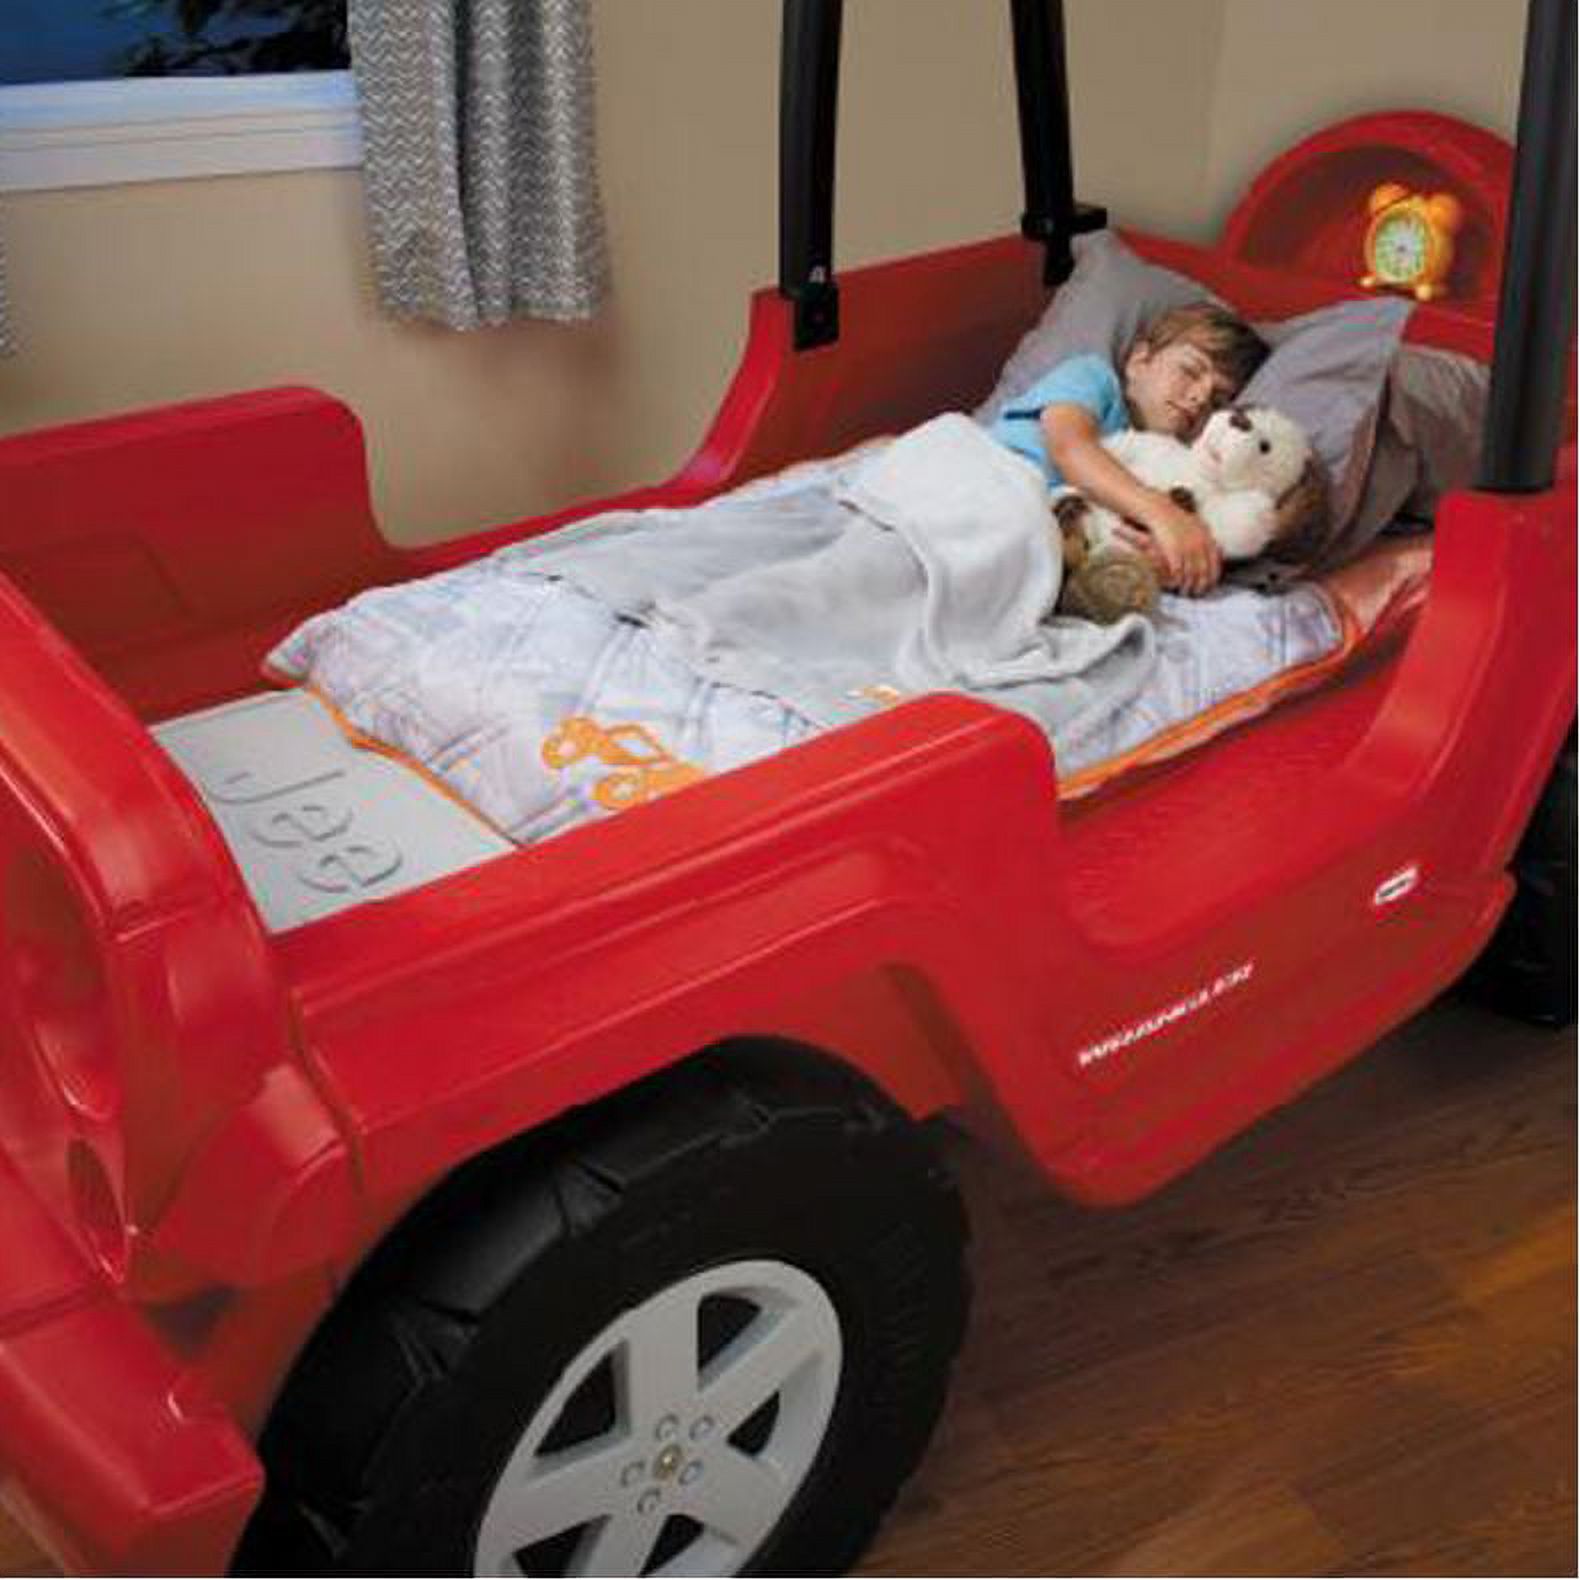 Little Tikes Jeep Wrangler Toddler-to-Twin Convertible Bed, Red - image 4 of 8